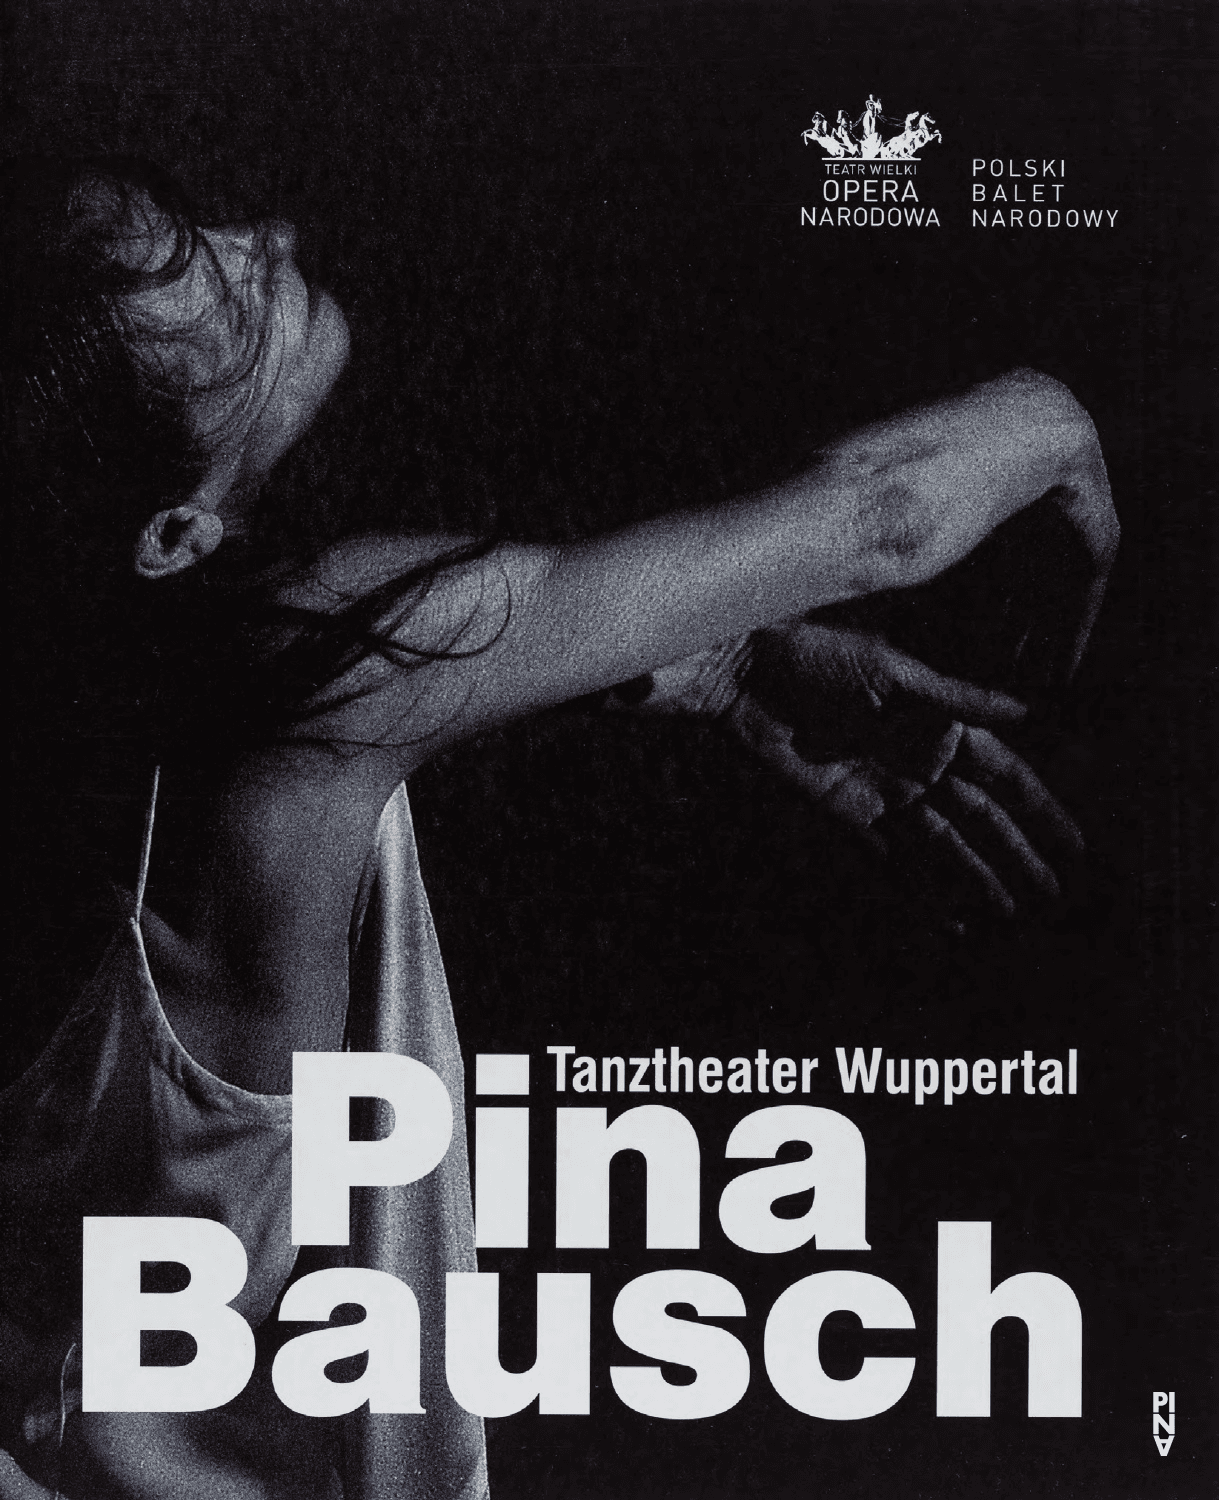 Booklet for “Café Müller”, “The Rite of Spring” and “Vollmond (Full Moon)” by Pina Bausch with Tanztheater Wuppertal in in Warsaw, 09/16/2011 – 09/22/2011